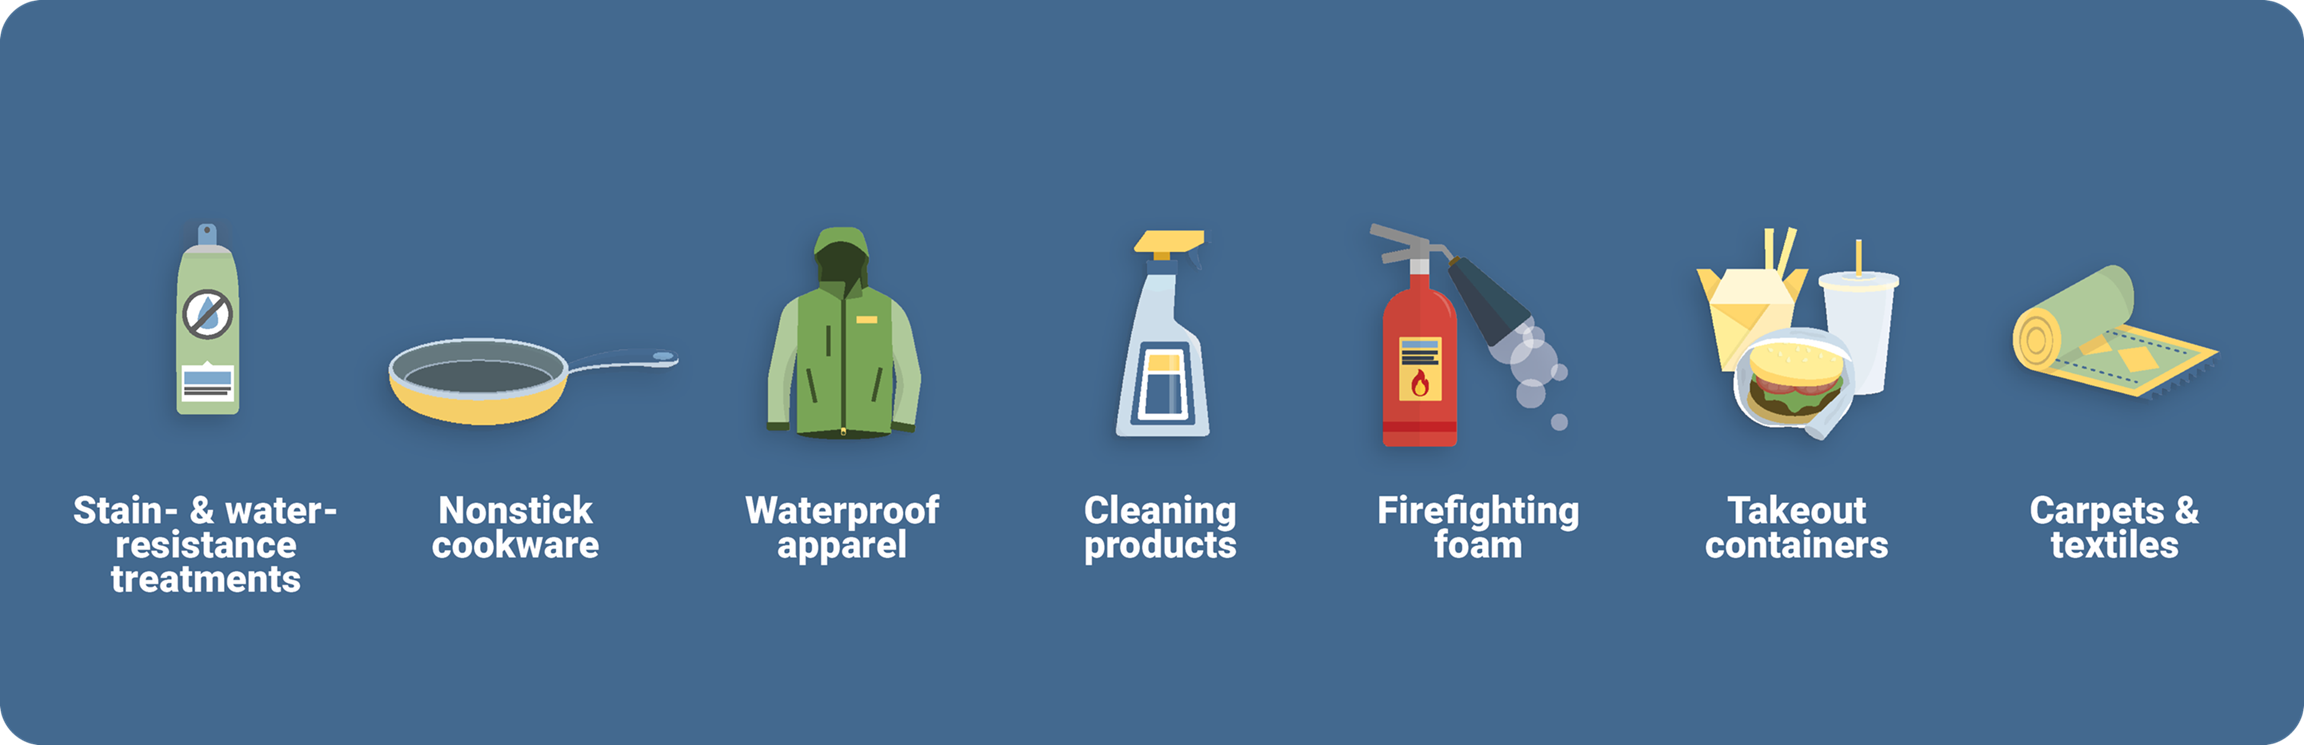 Typical consumer products that can contain PFAS chemicals, such as carpets, non-stick cookware, and waterproof apparel. 